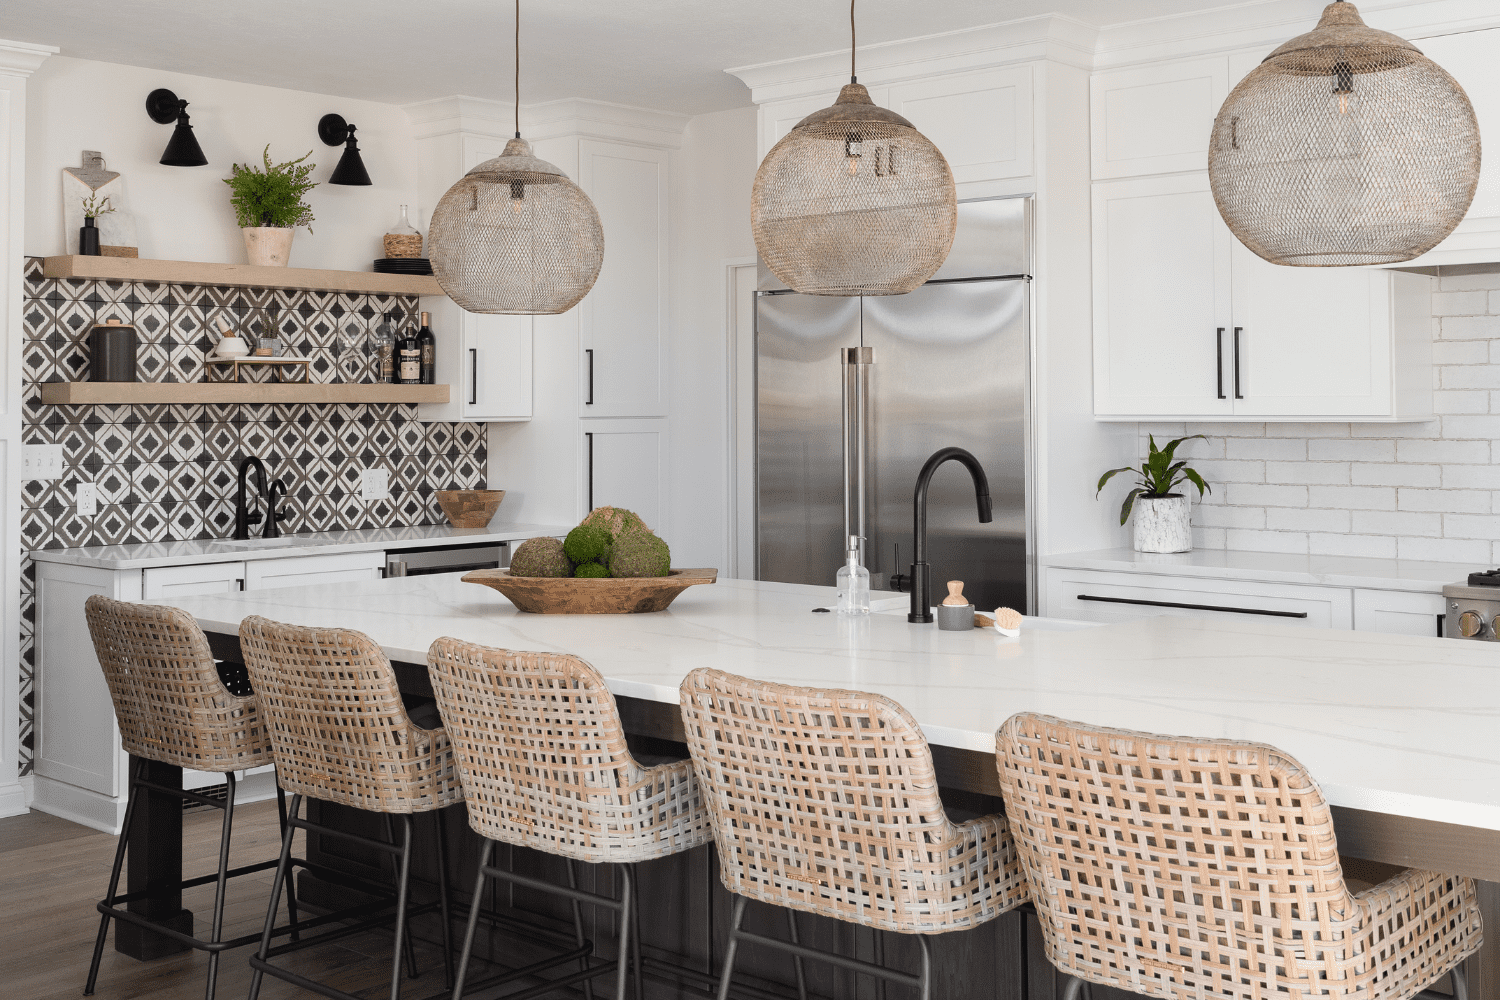 Nicholas Design Build | A kitchen with white cabinets and wicker stools.